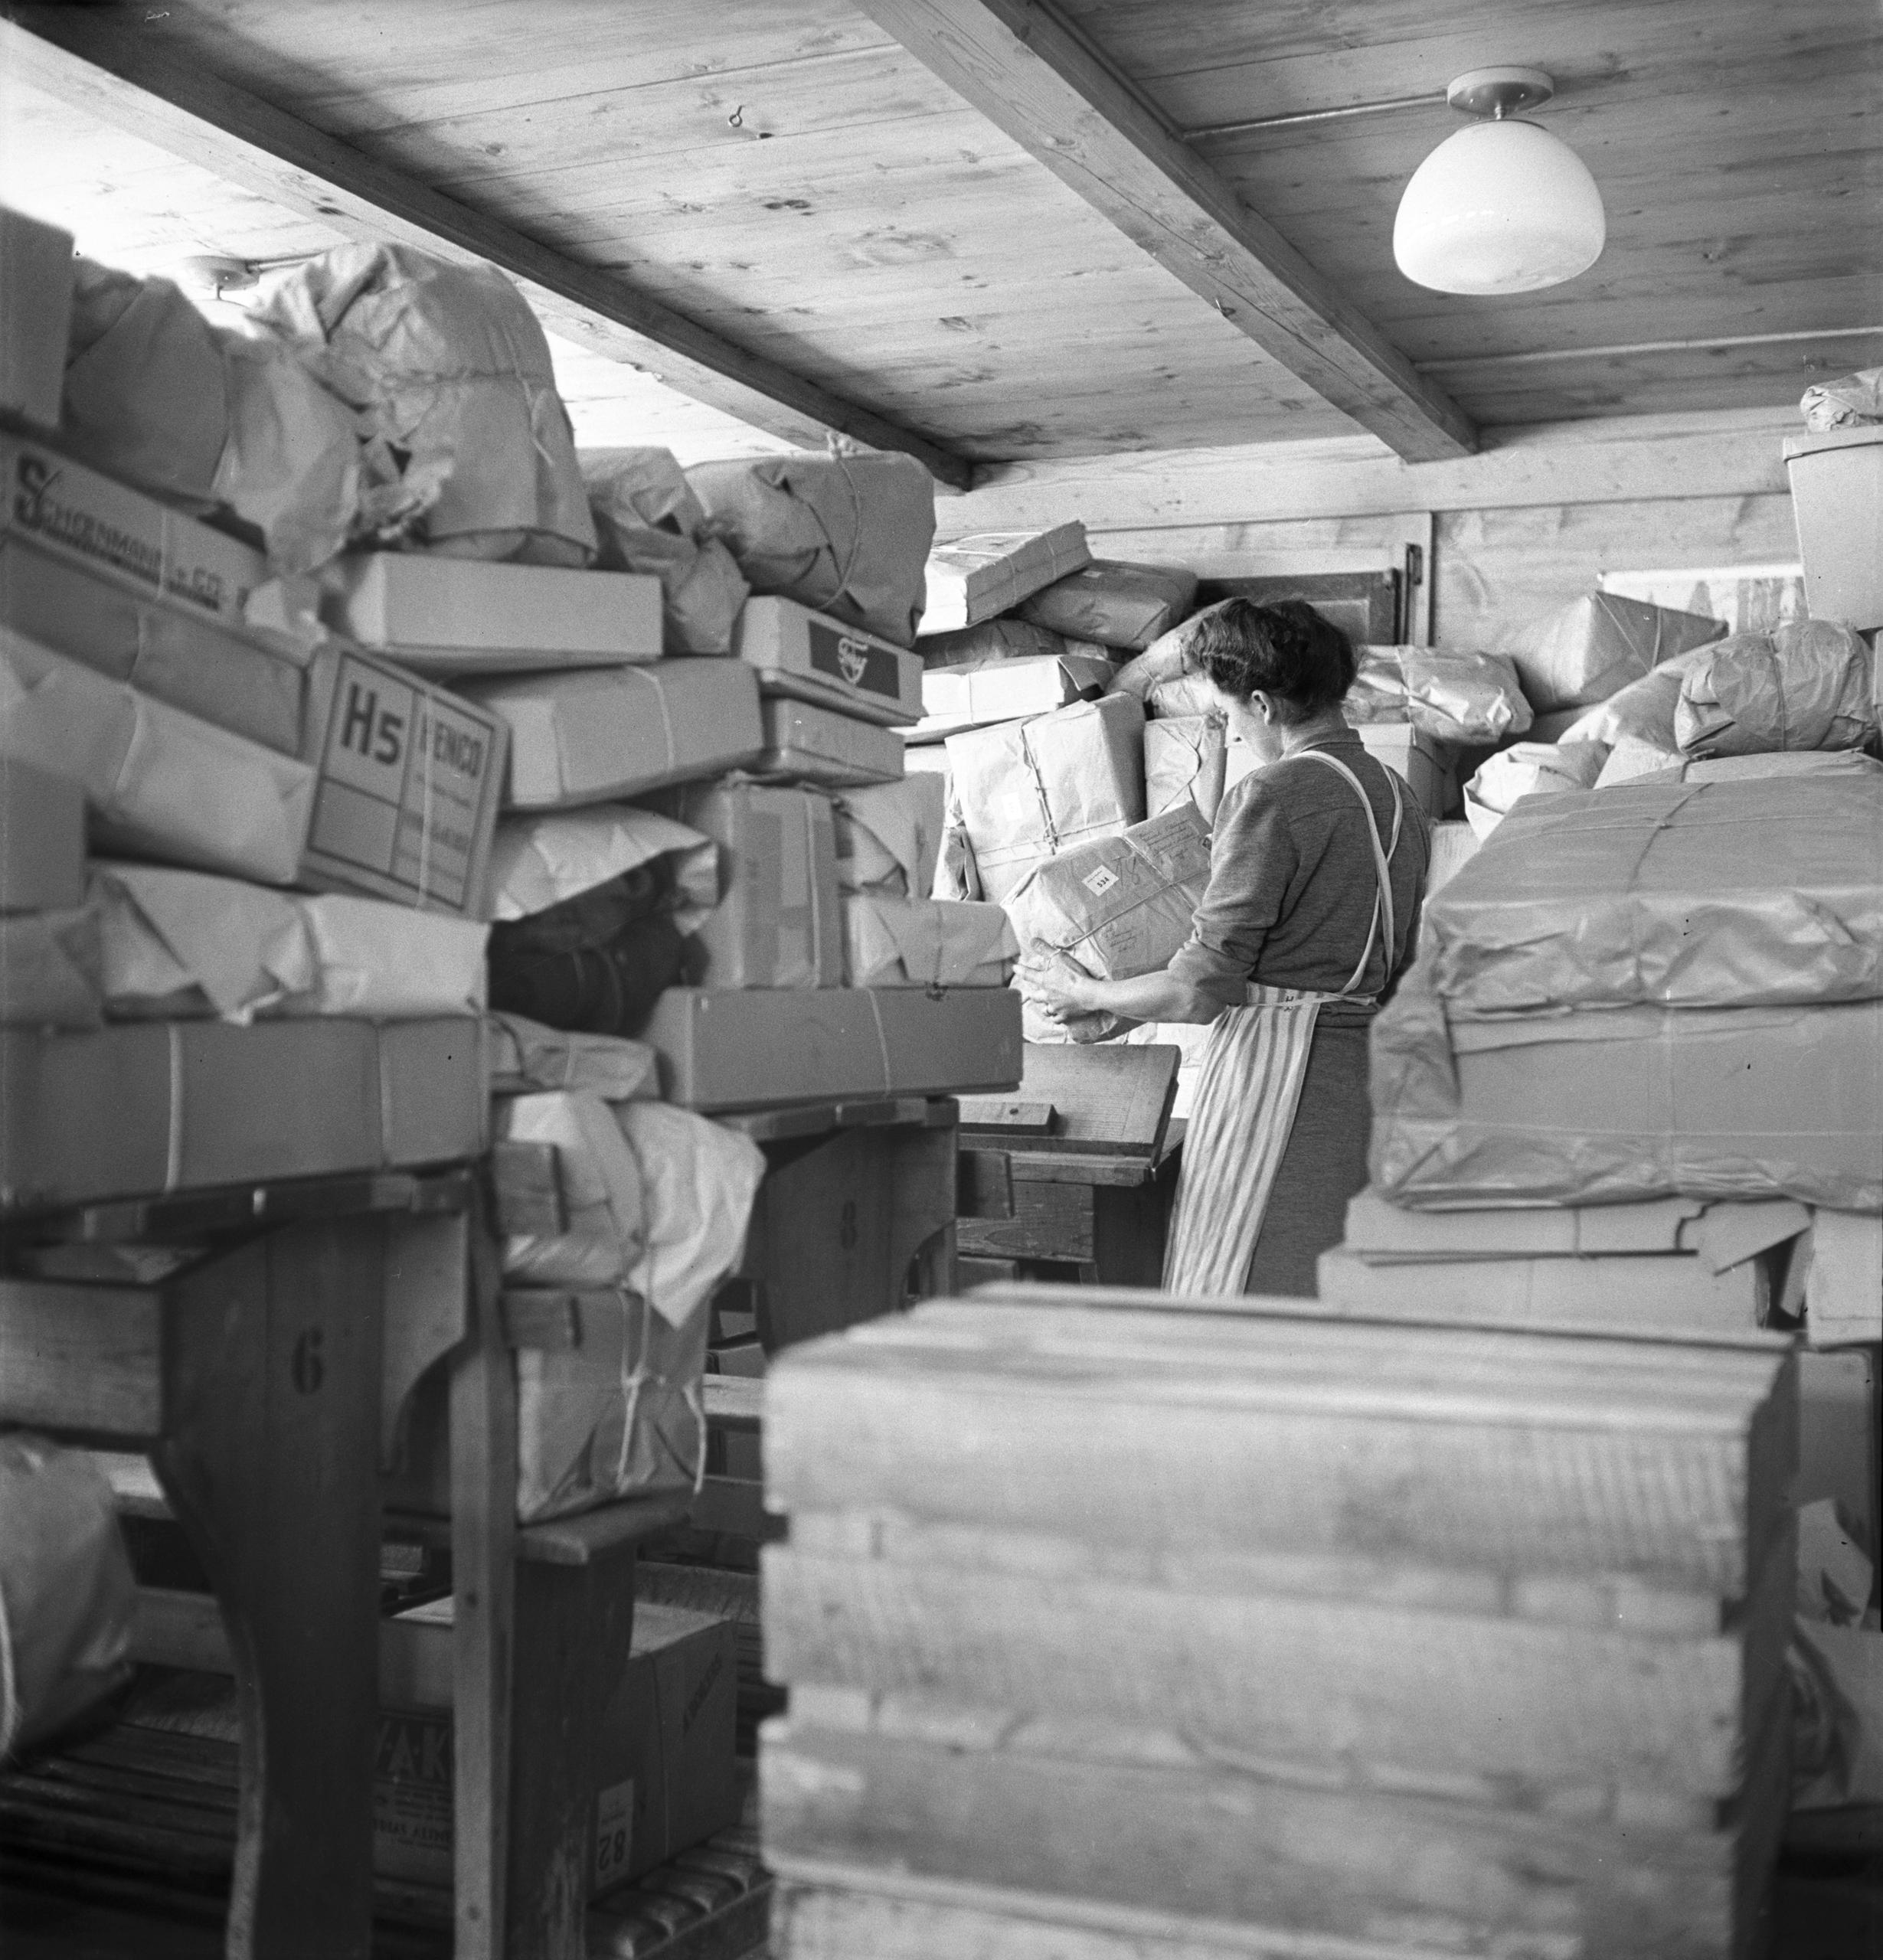 Woman standing among many parcels